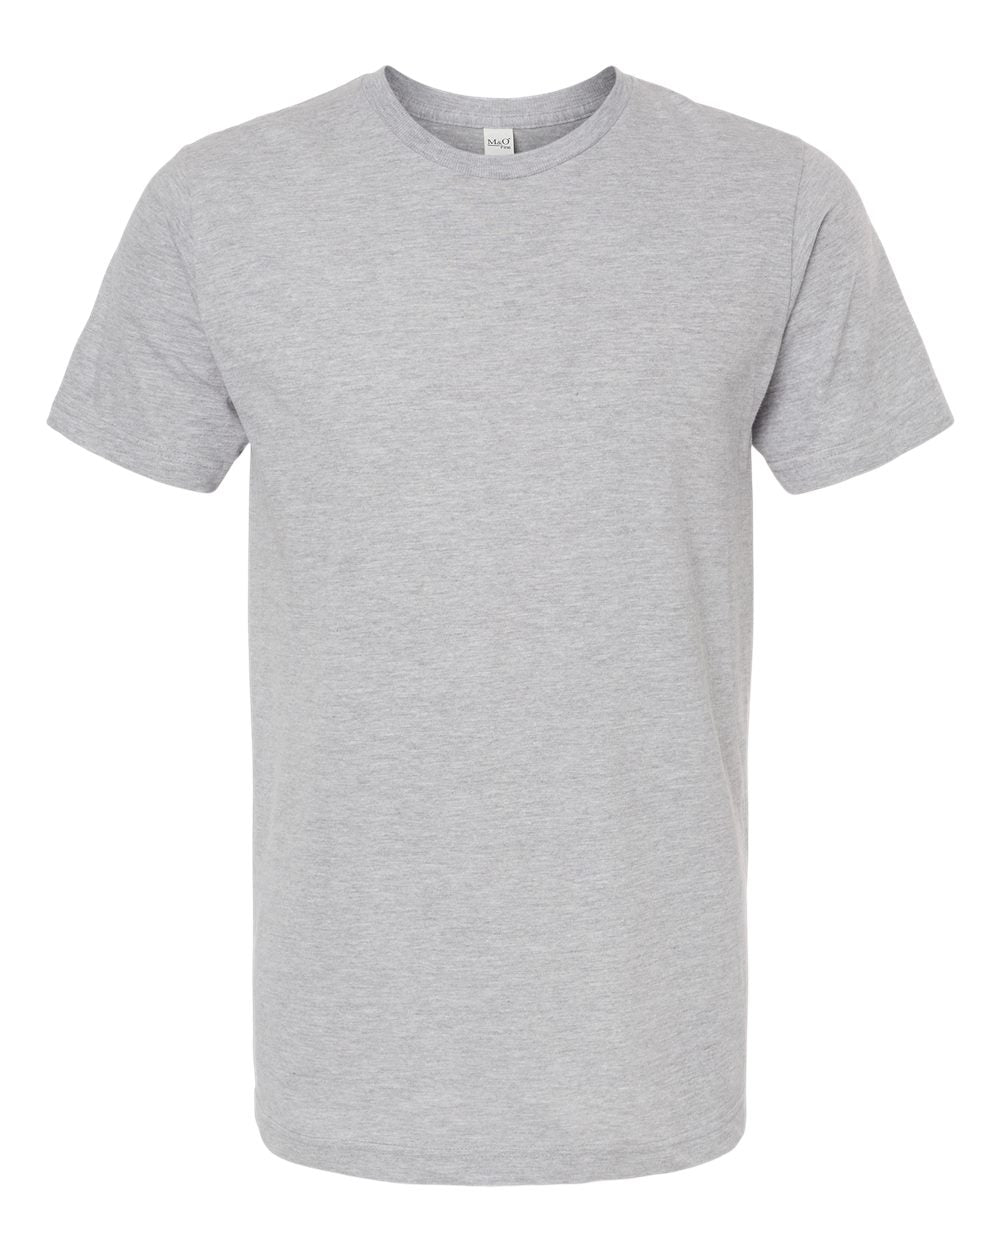 M&O Fine Jersey T-Shirt 4502 #color_Heather Grey